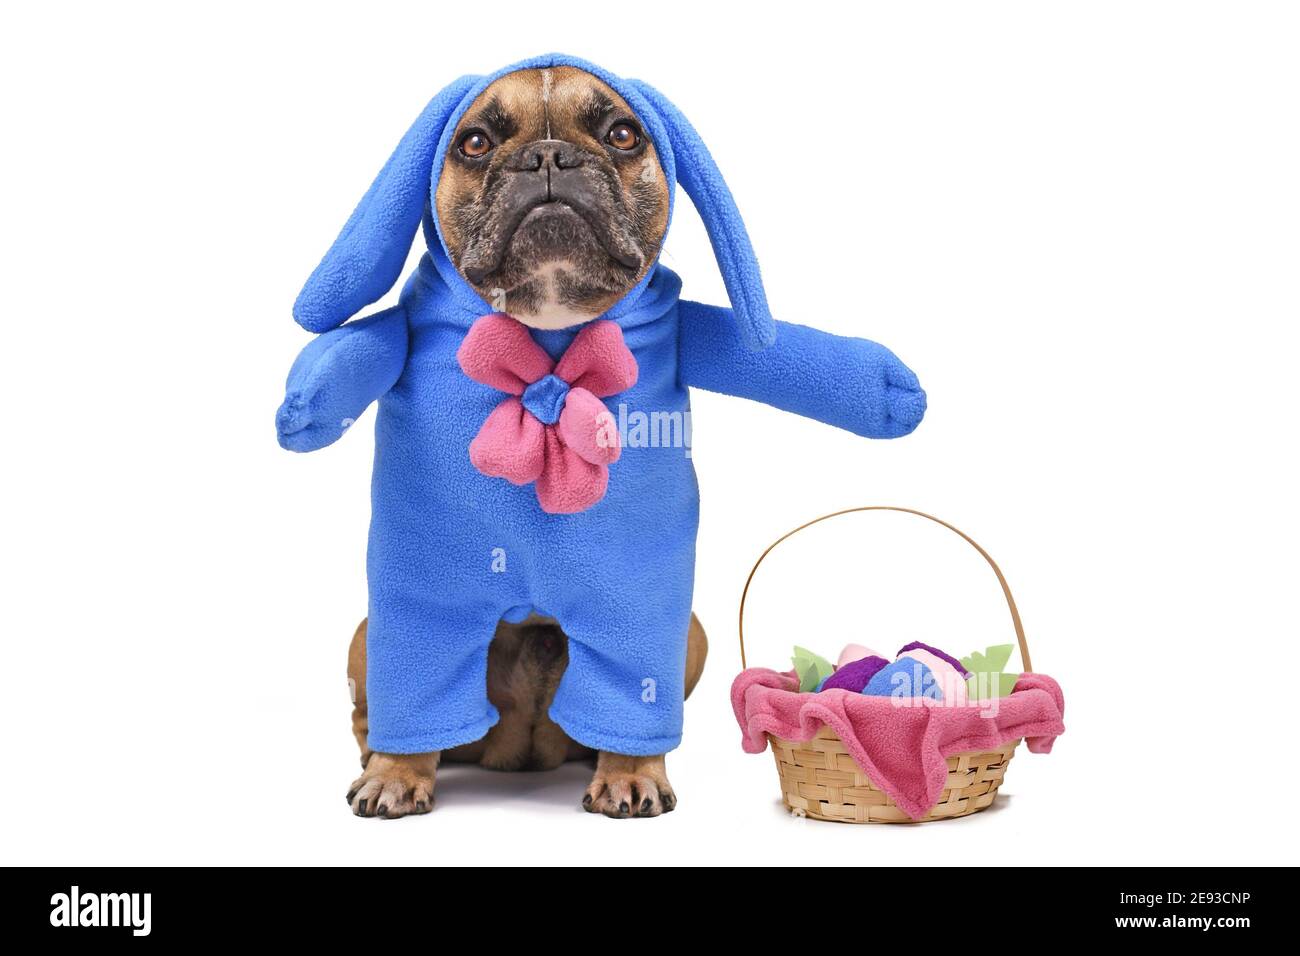 French Bulldog dog dressed up with Easter bunny costume with blue full body suit next to  Easter basket with eggs isolated on white background Stock Photo